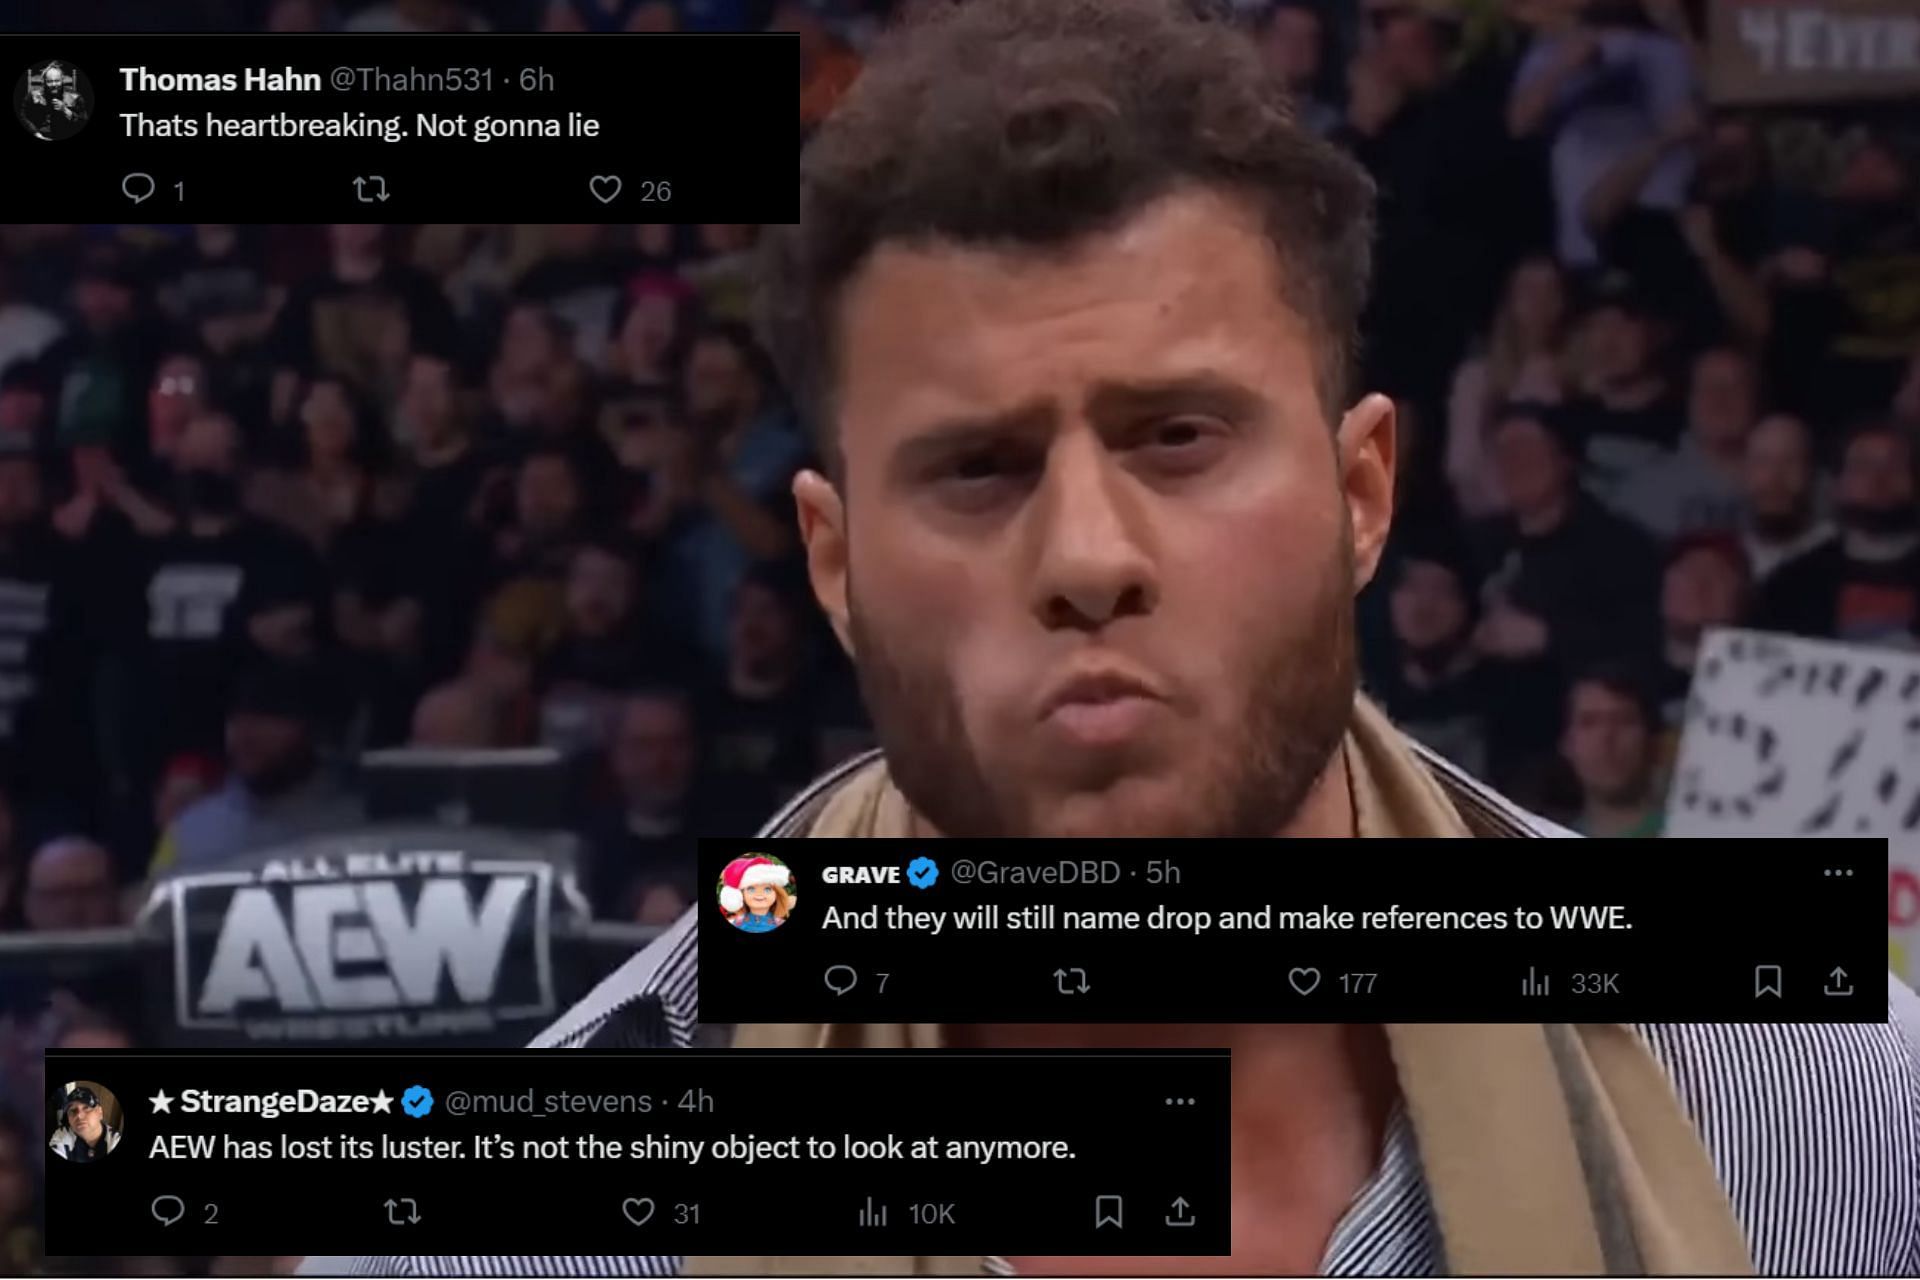 Social media had something to say about empty seats at an AEW event